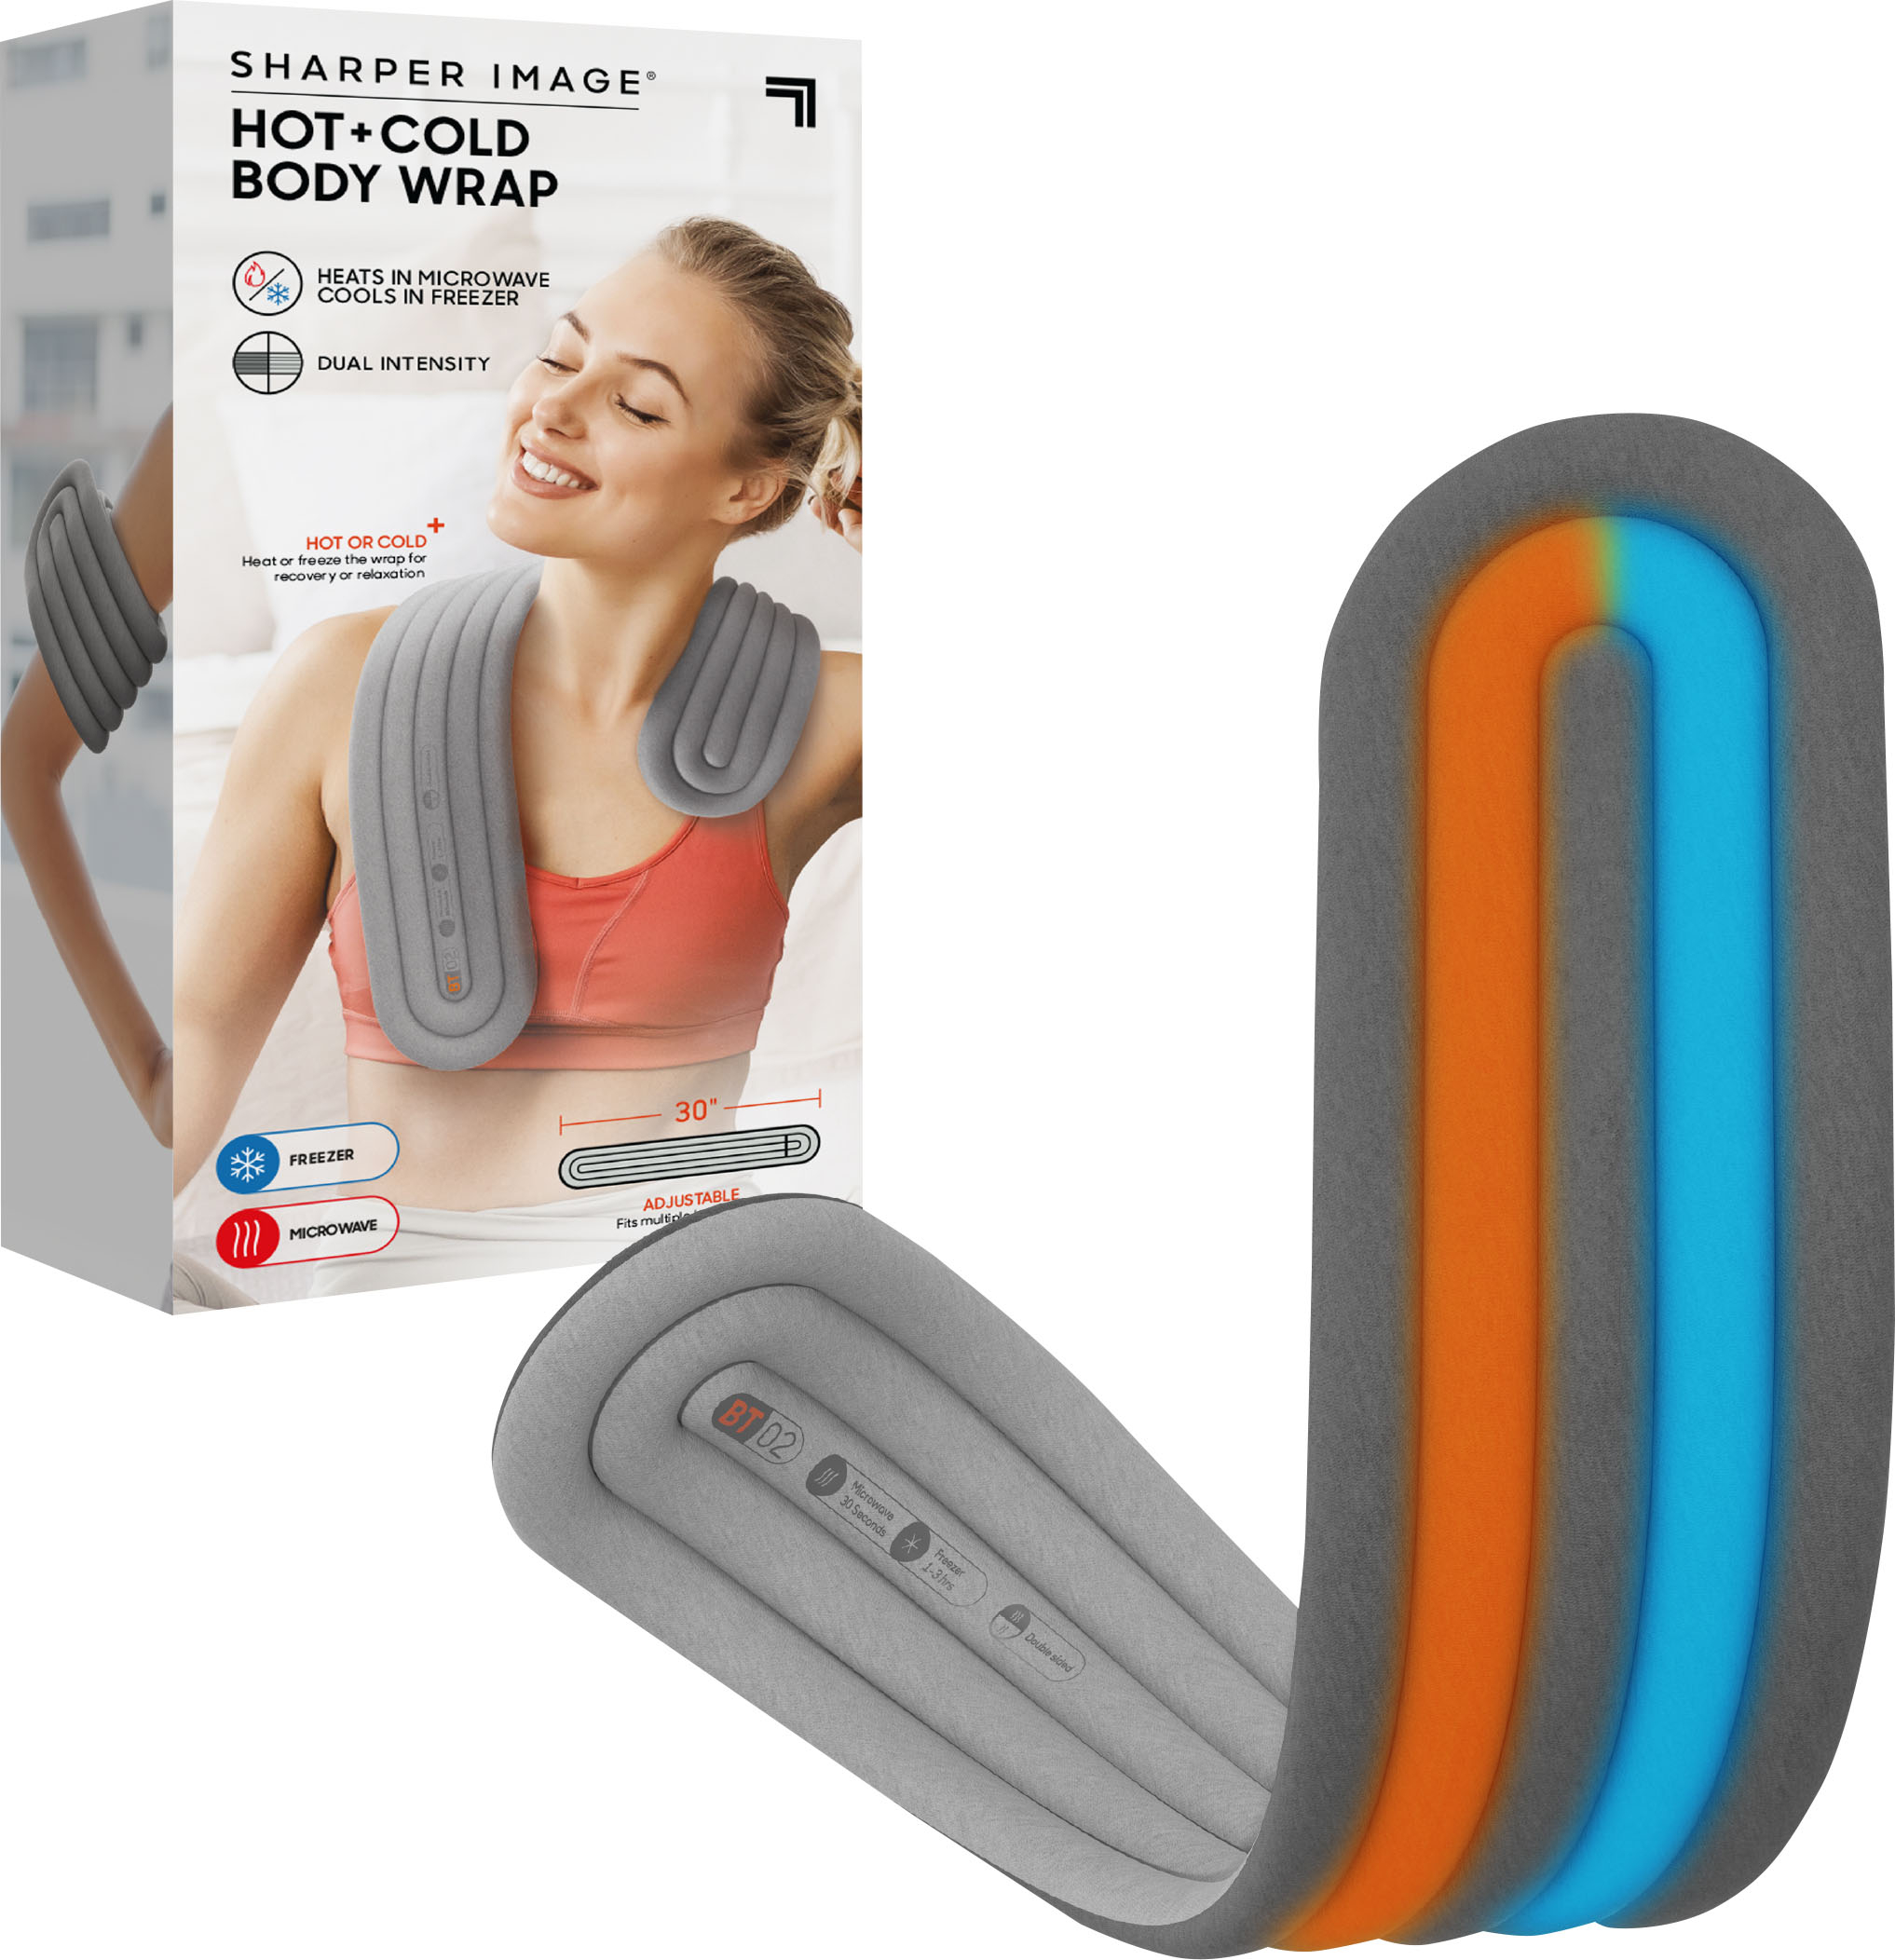 Angle View: Sharper Image - Hot + Cold Body Wrap, Dual Intensity Soft Fabric for Neck, Shoulders, Legs & Arms - Gray